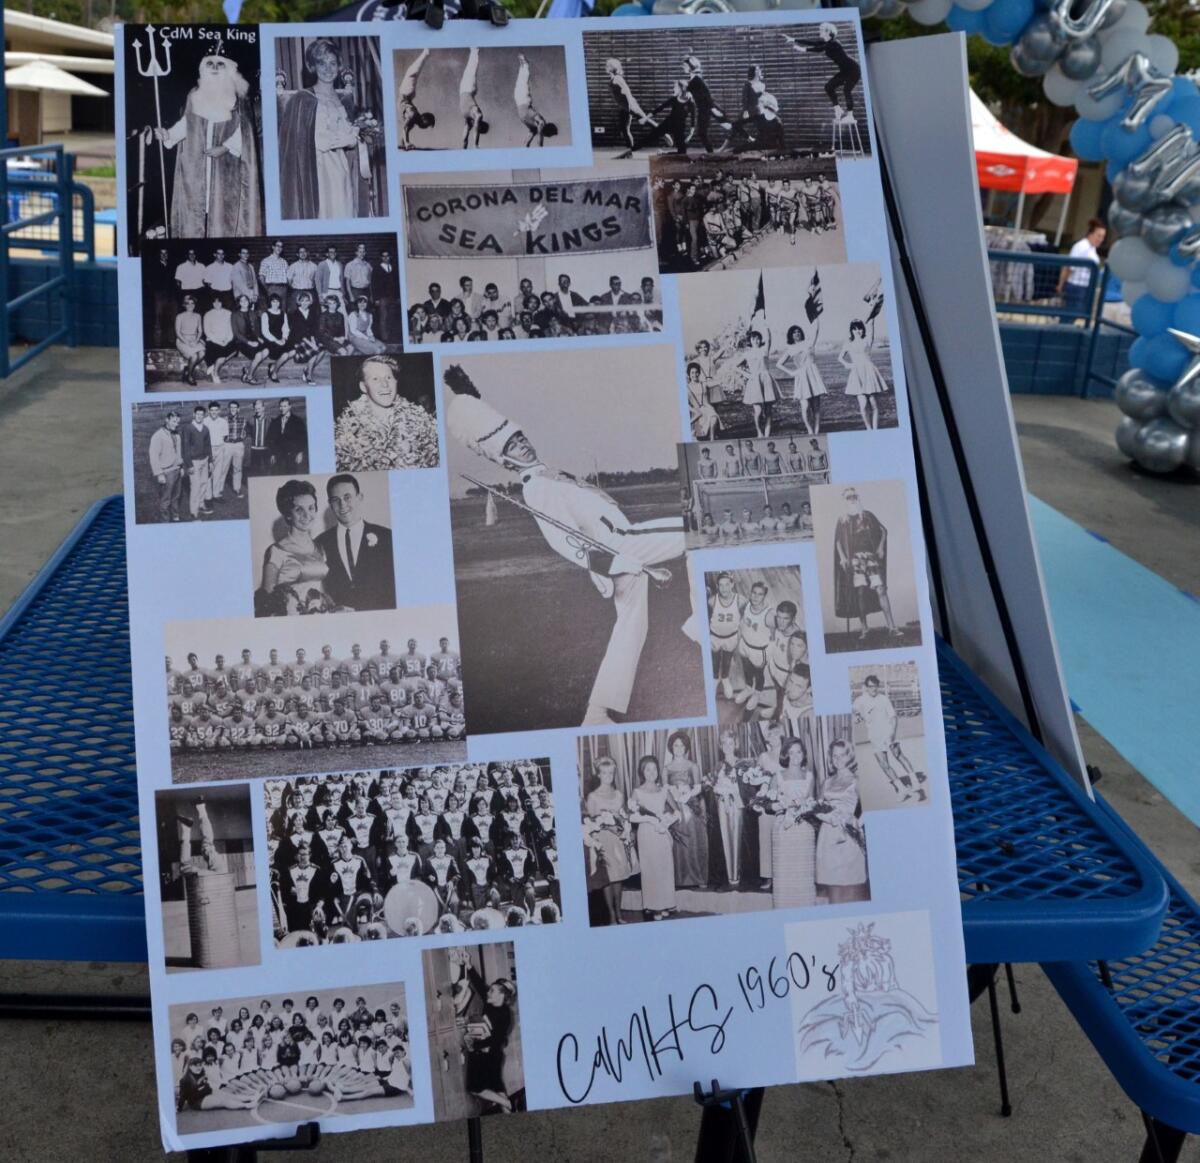 An Alumni Pavilion with photo boards was displayed at CdM High School's 60th anniversary jubilee.